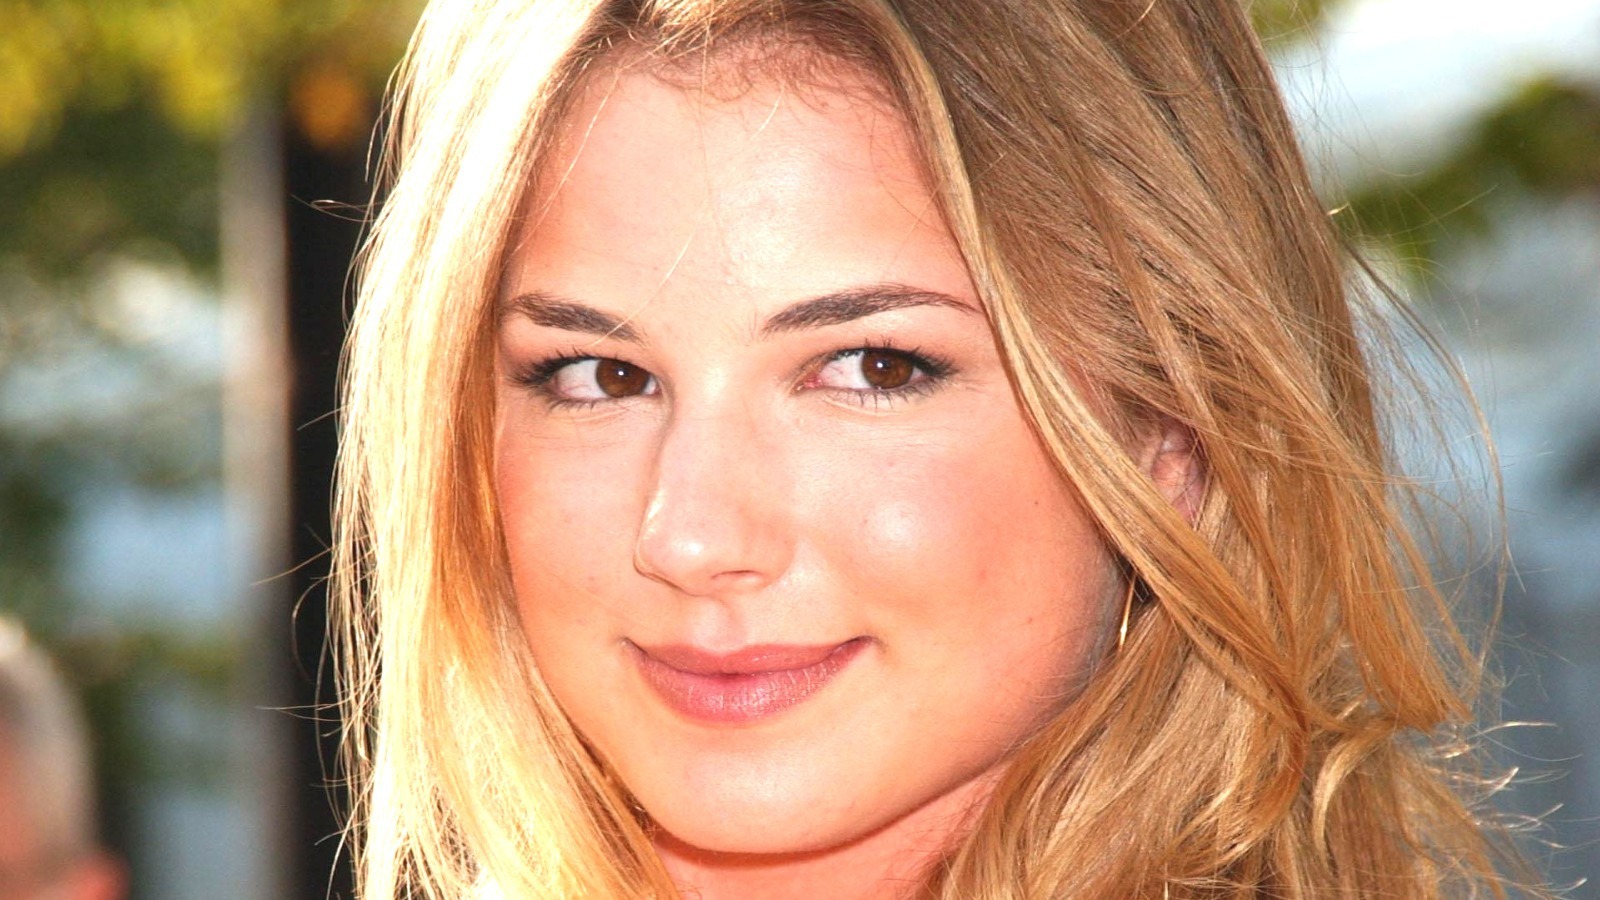 classic coke recommends emily vancamp nude pic